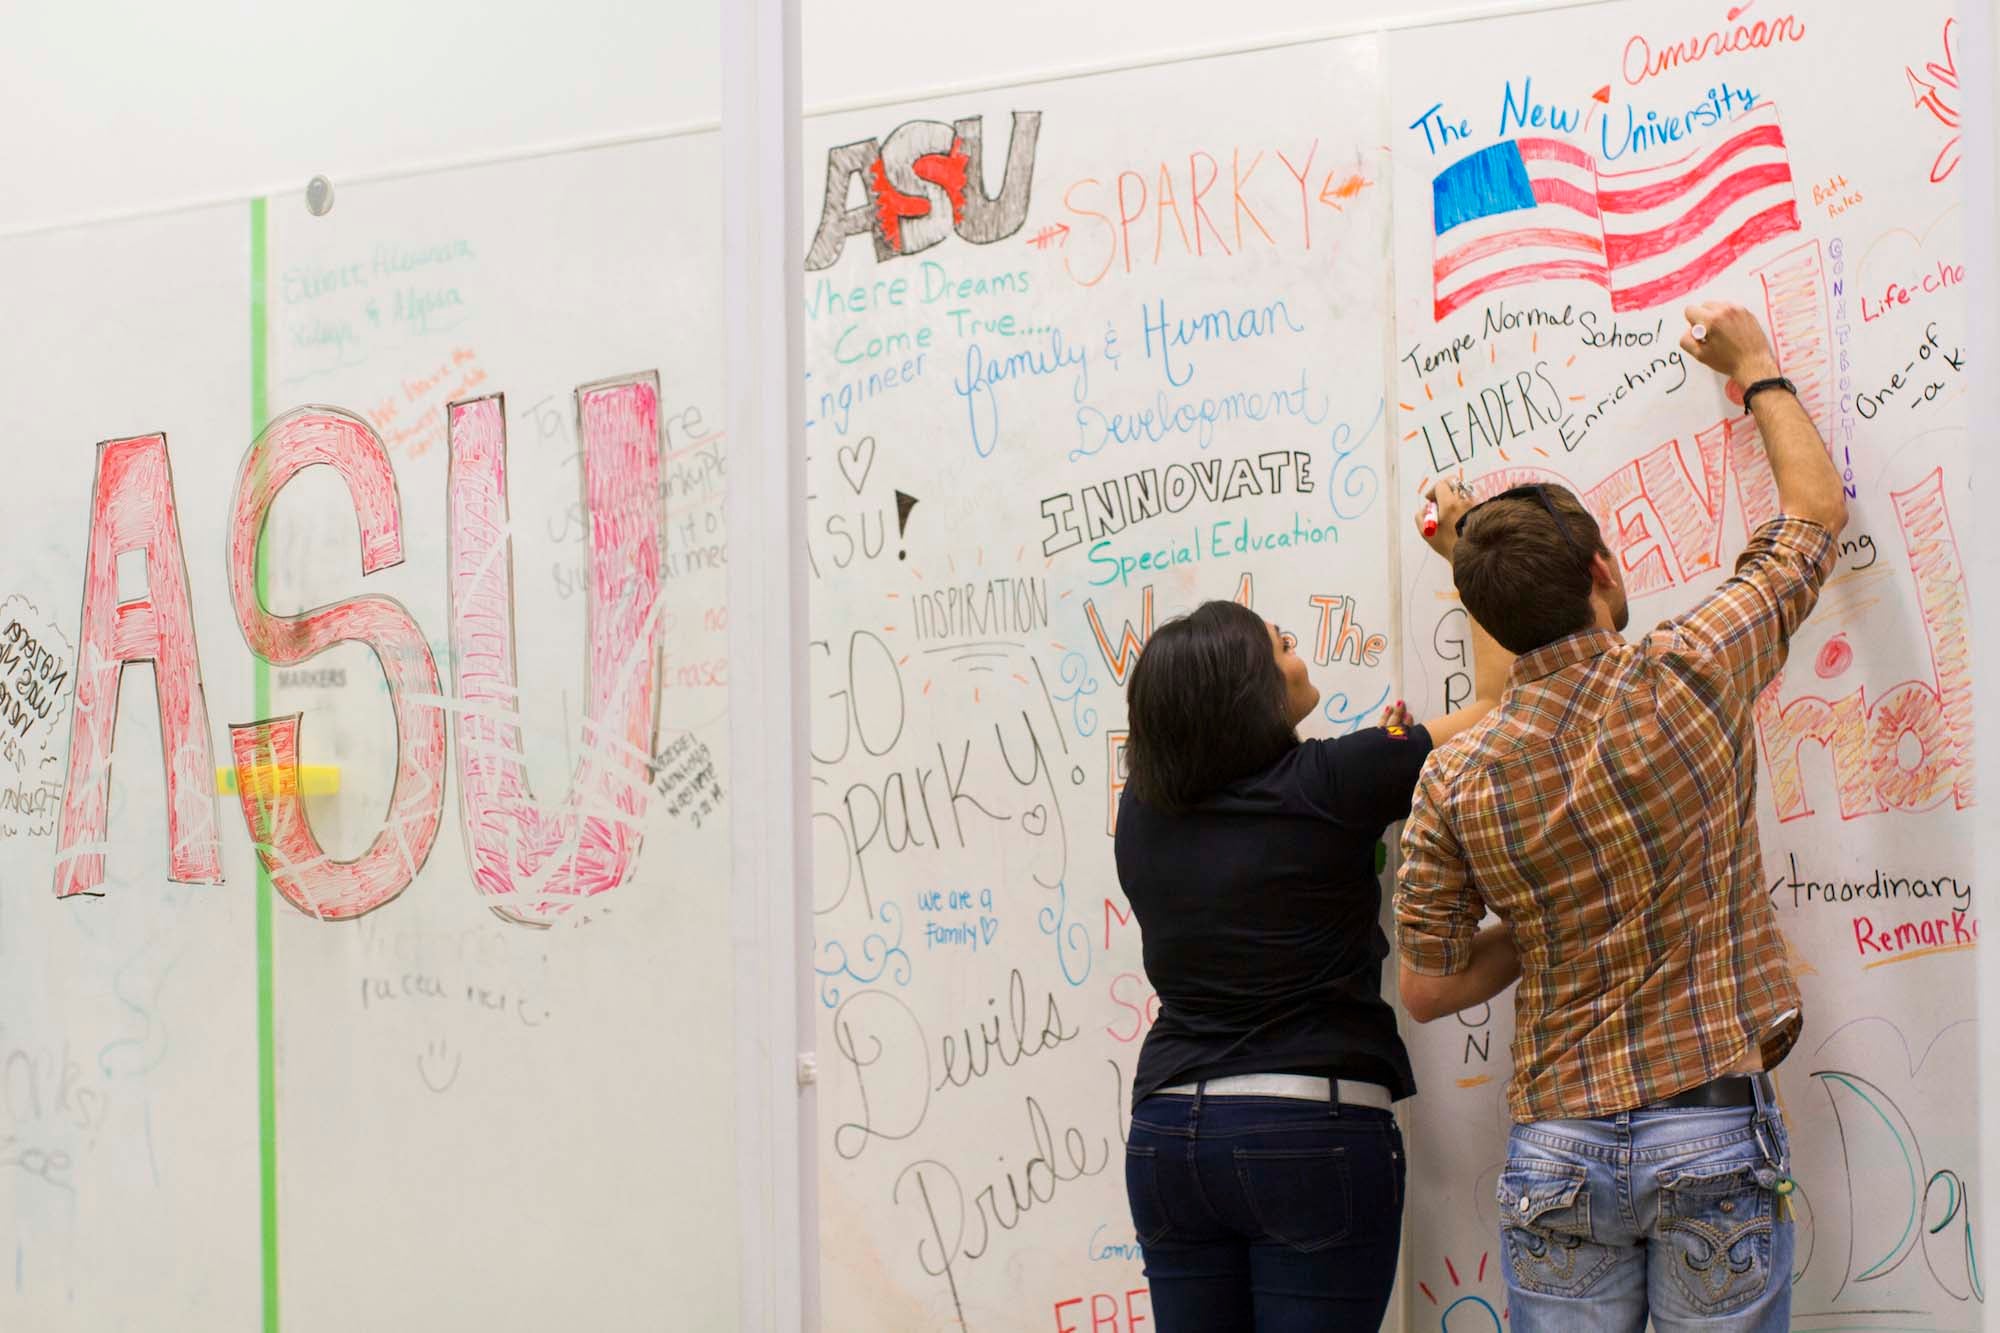 A man and woman write on a huge white board wall, where many others have written positive ASU sentiments before